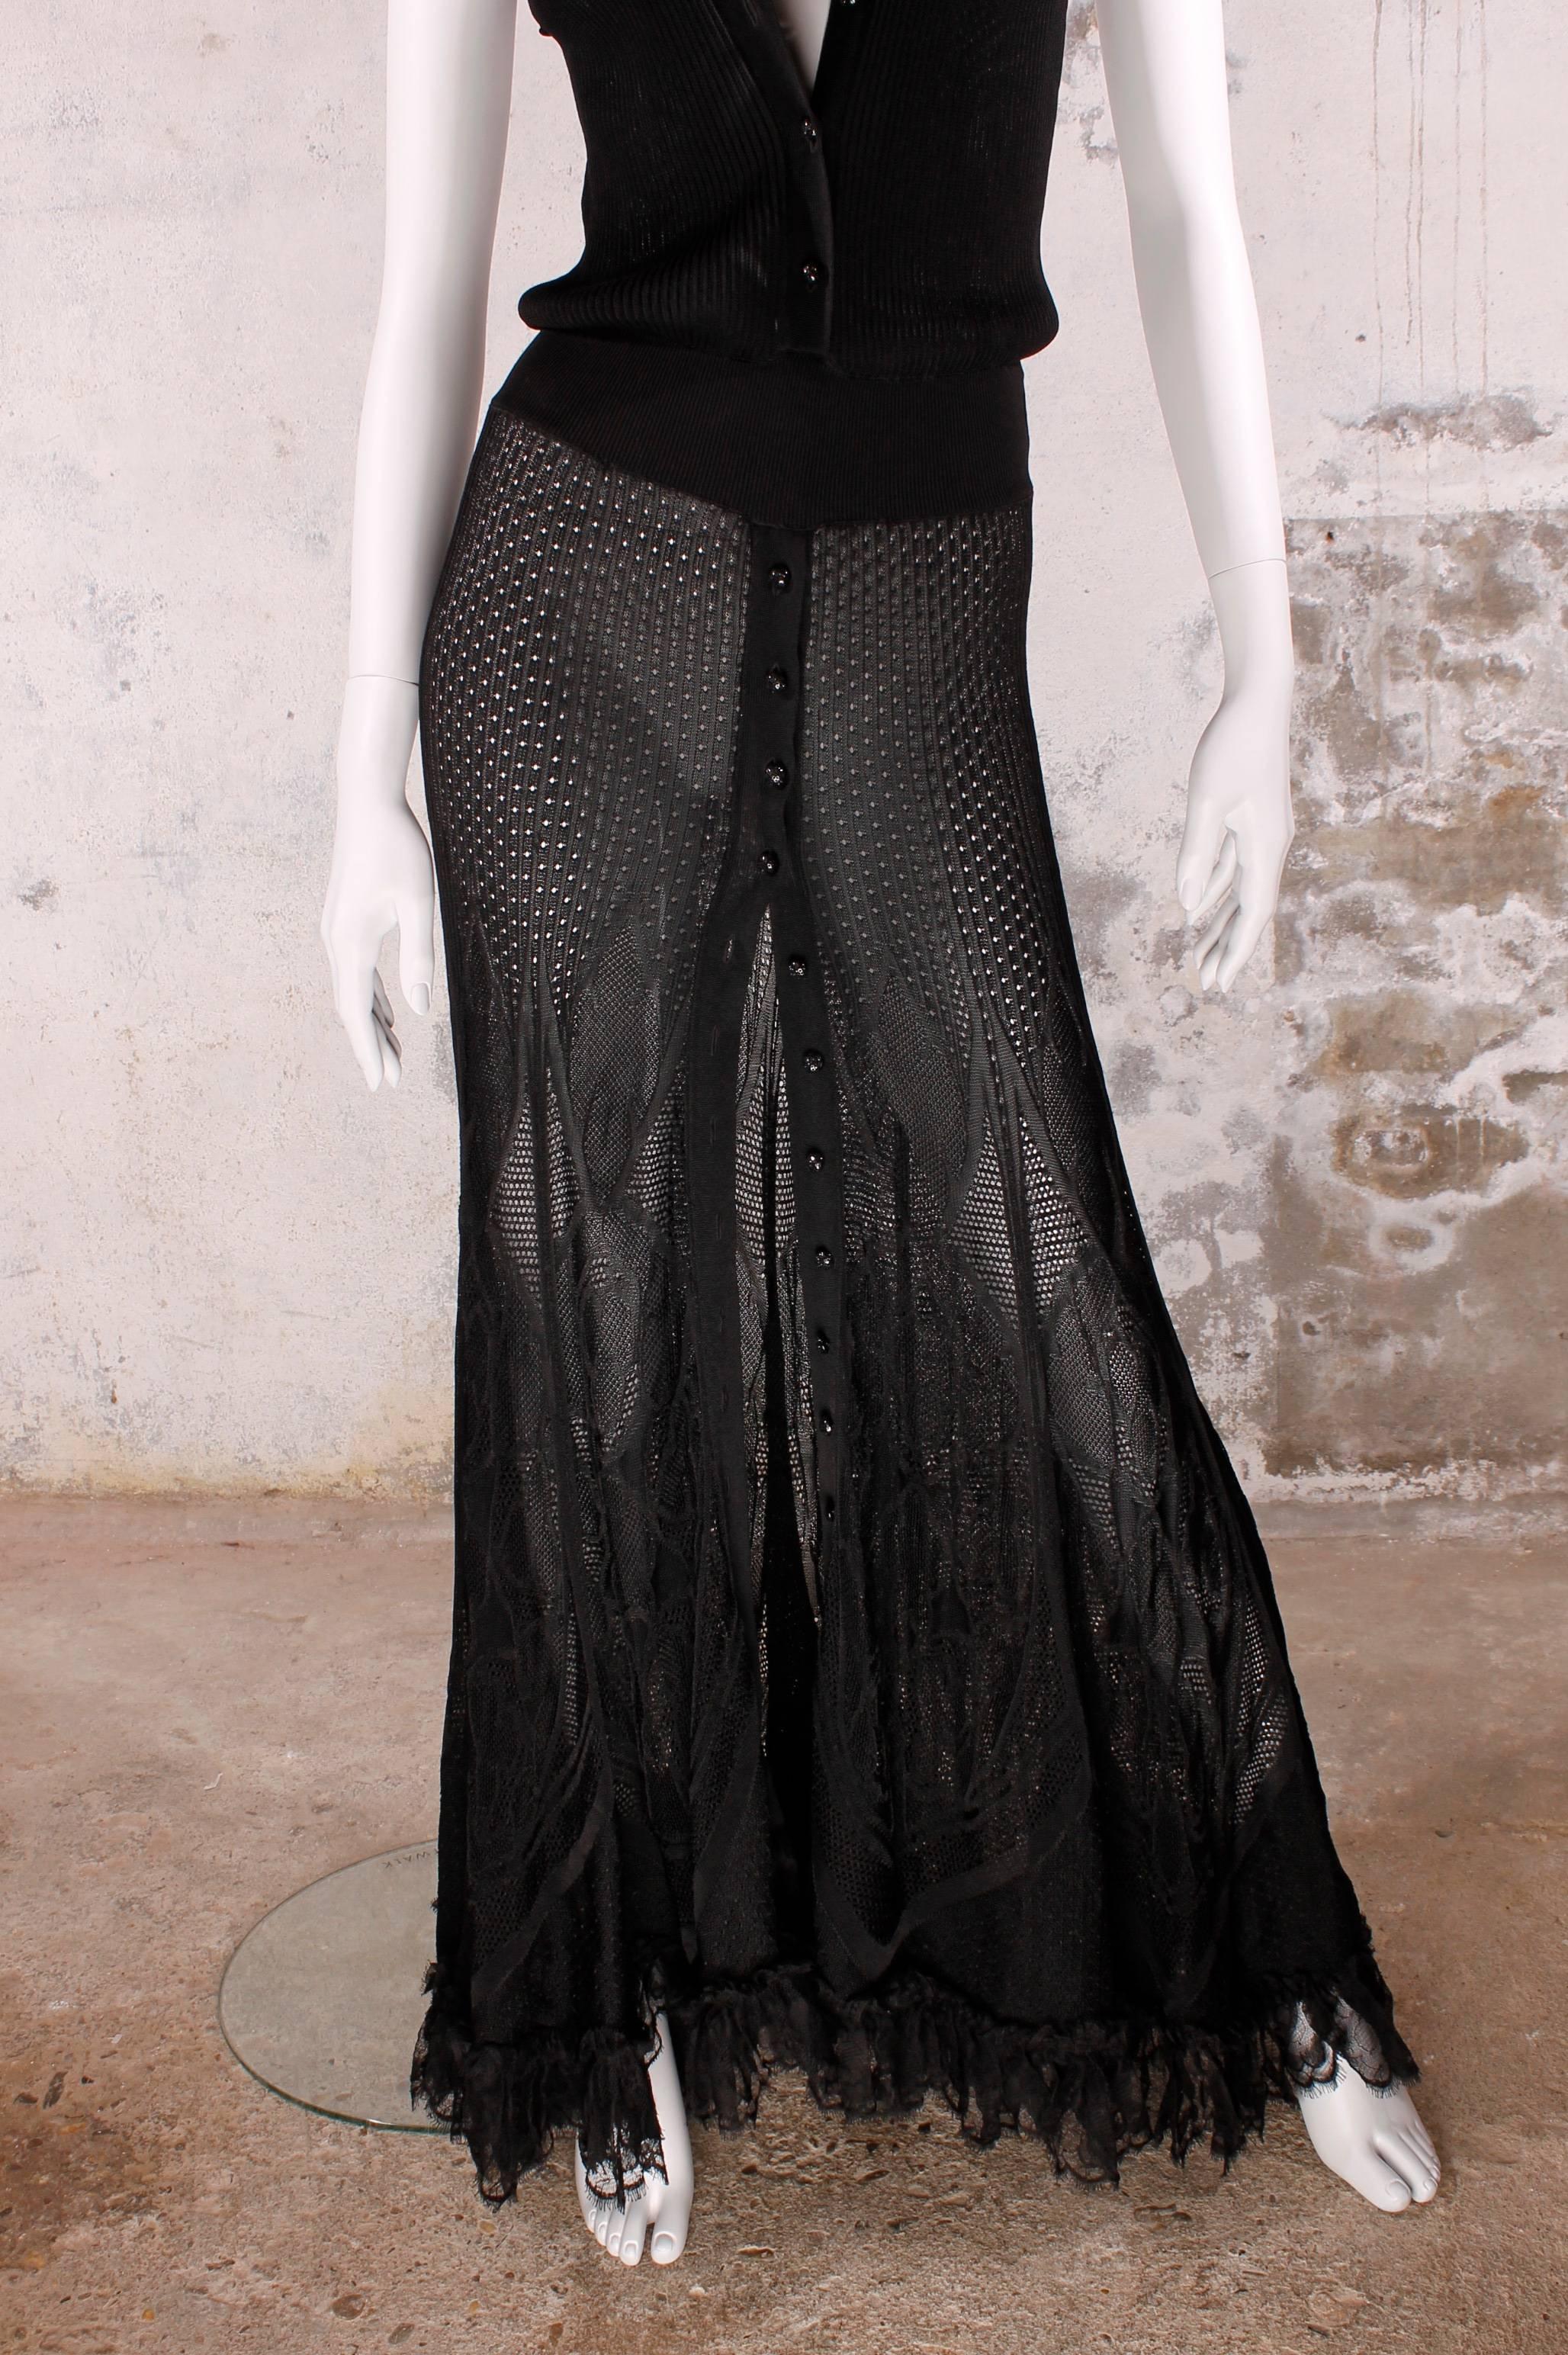 Chanel Dress & Trousers - knitted & lace / black 4